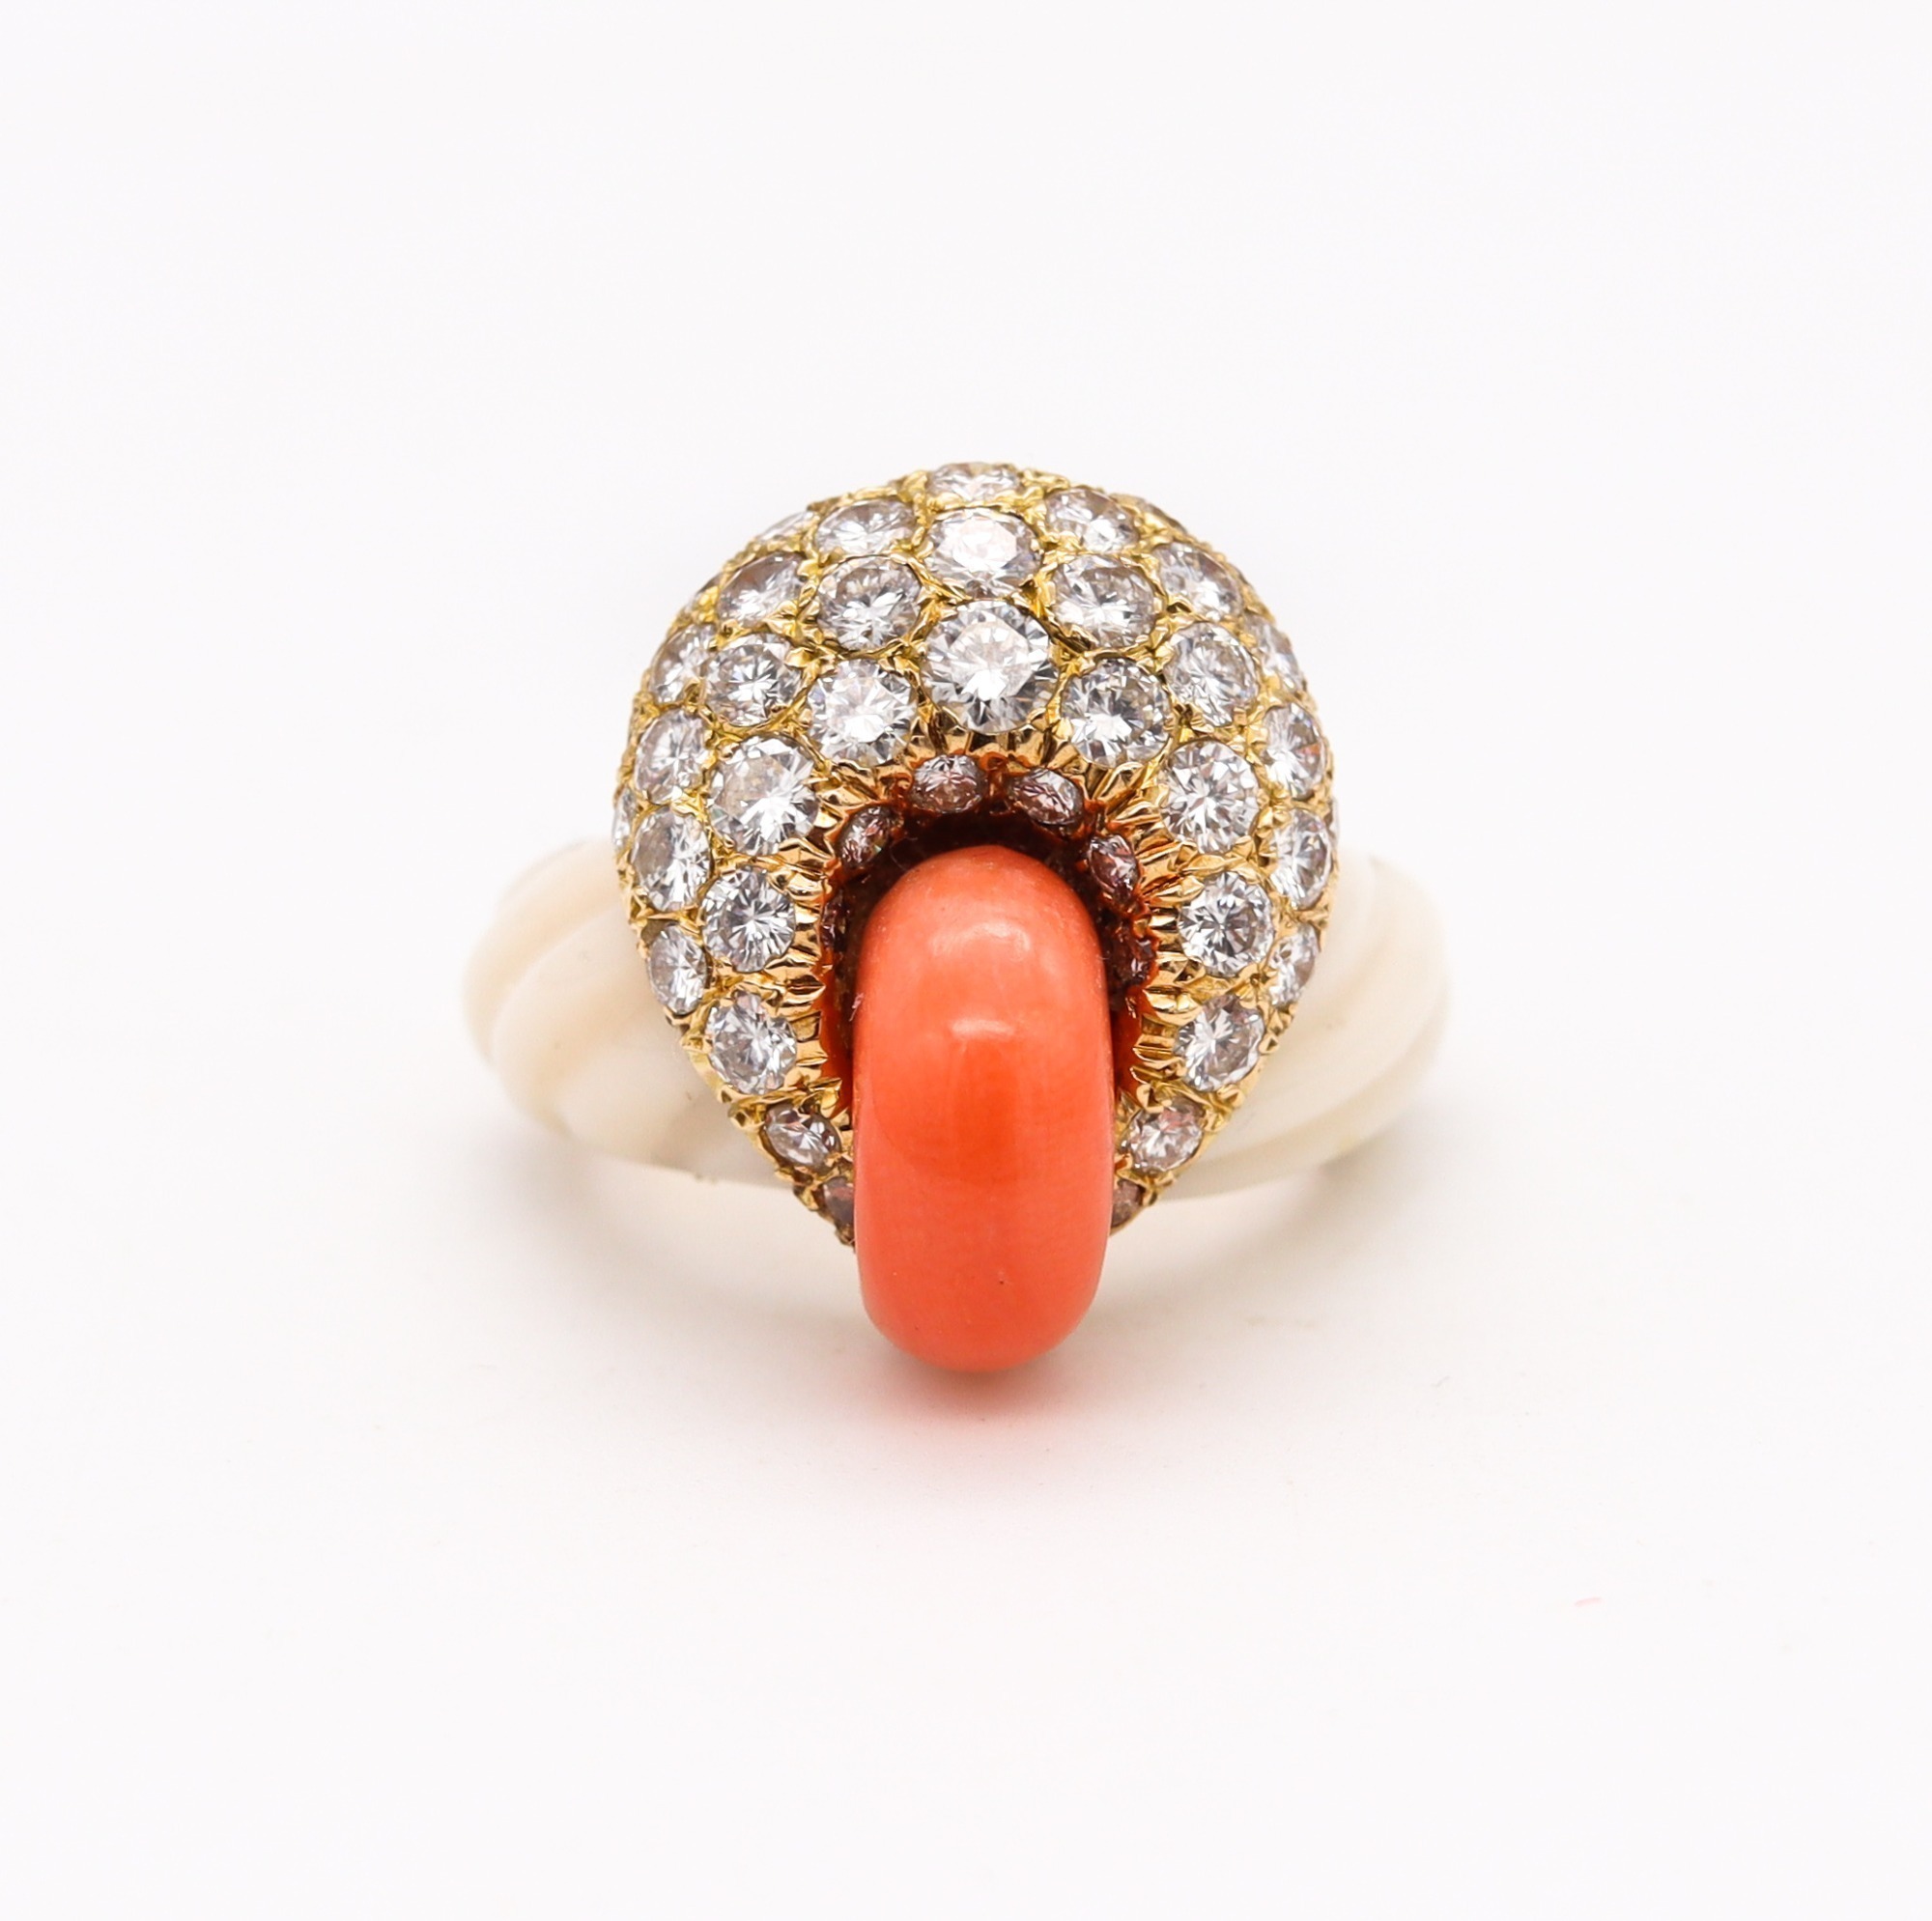 VAN CLEEF AND ARPELS 18K GOLD CORAL AND DIAMOND COCKTAIL RING, CIRCA 1970